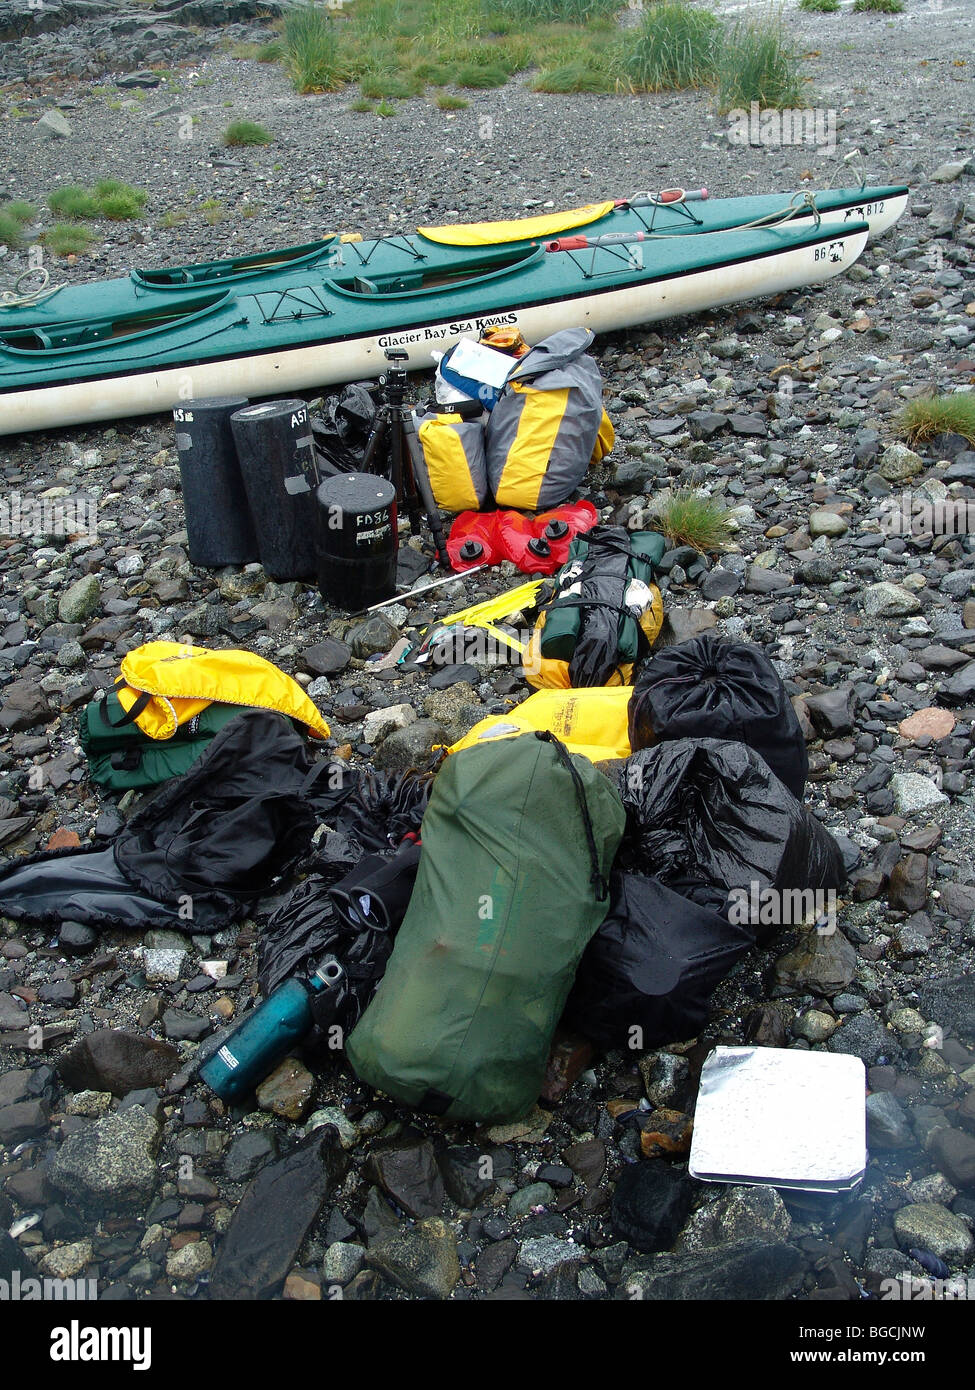 bear can,equipment is waterproof and safe for bears. Kayak tour in the Glacier Bay National Park, Alaska, USA. Stock Photo